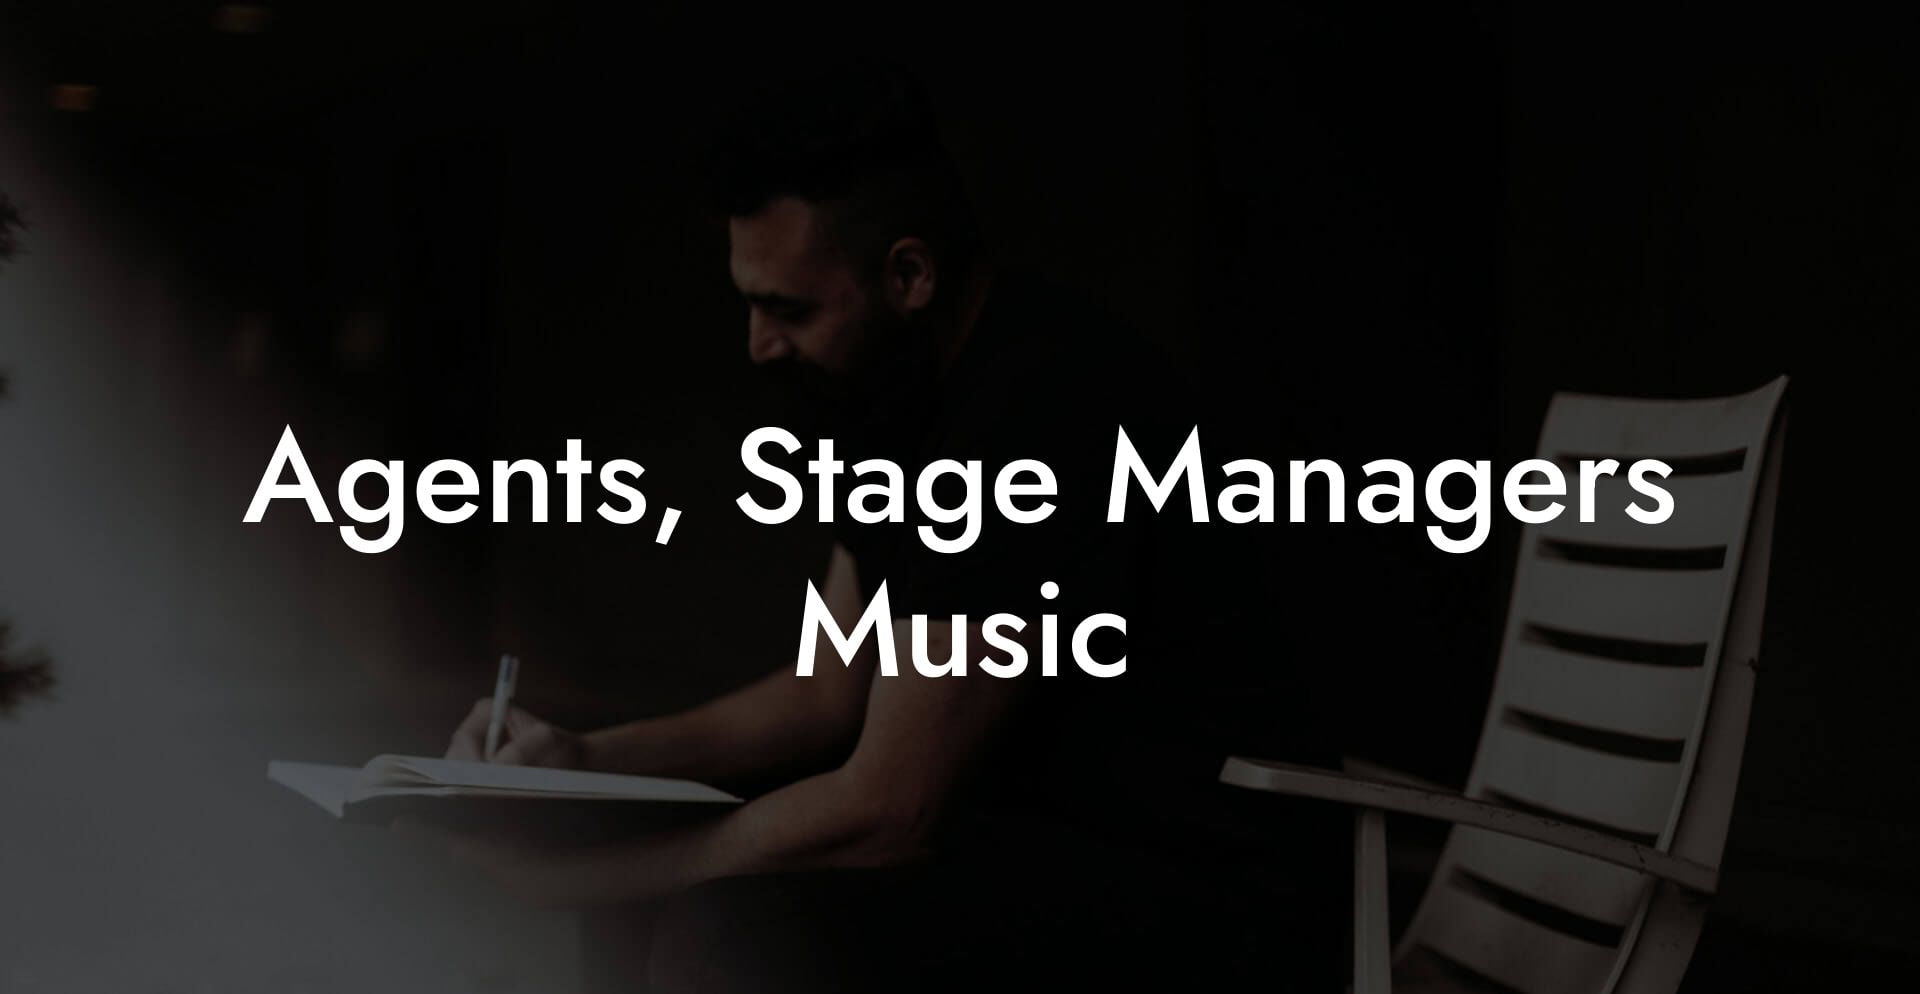 Agents, Stage Managers Music